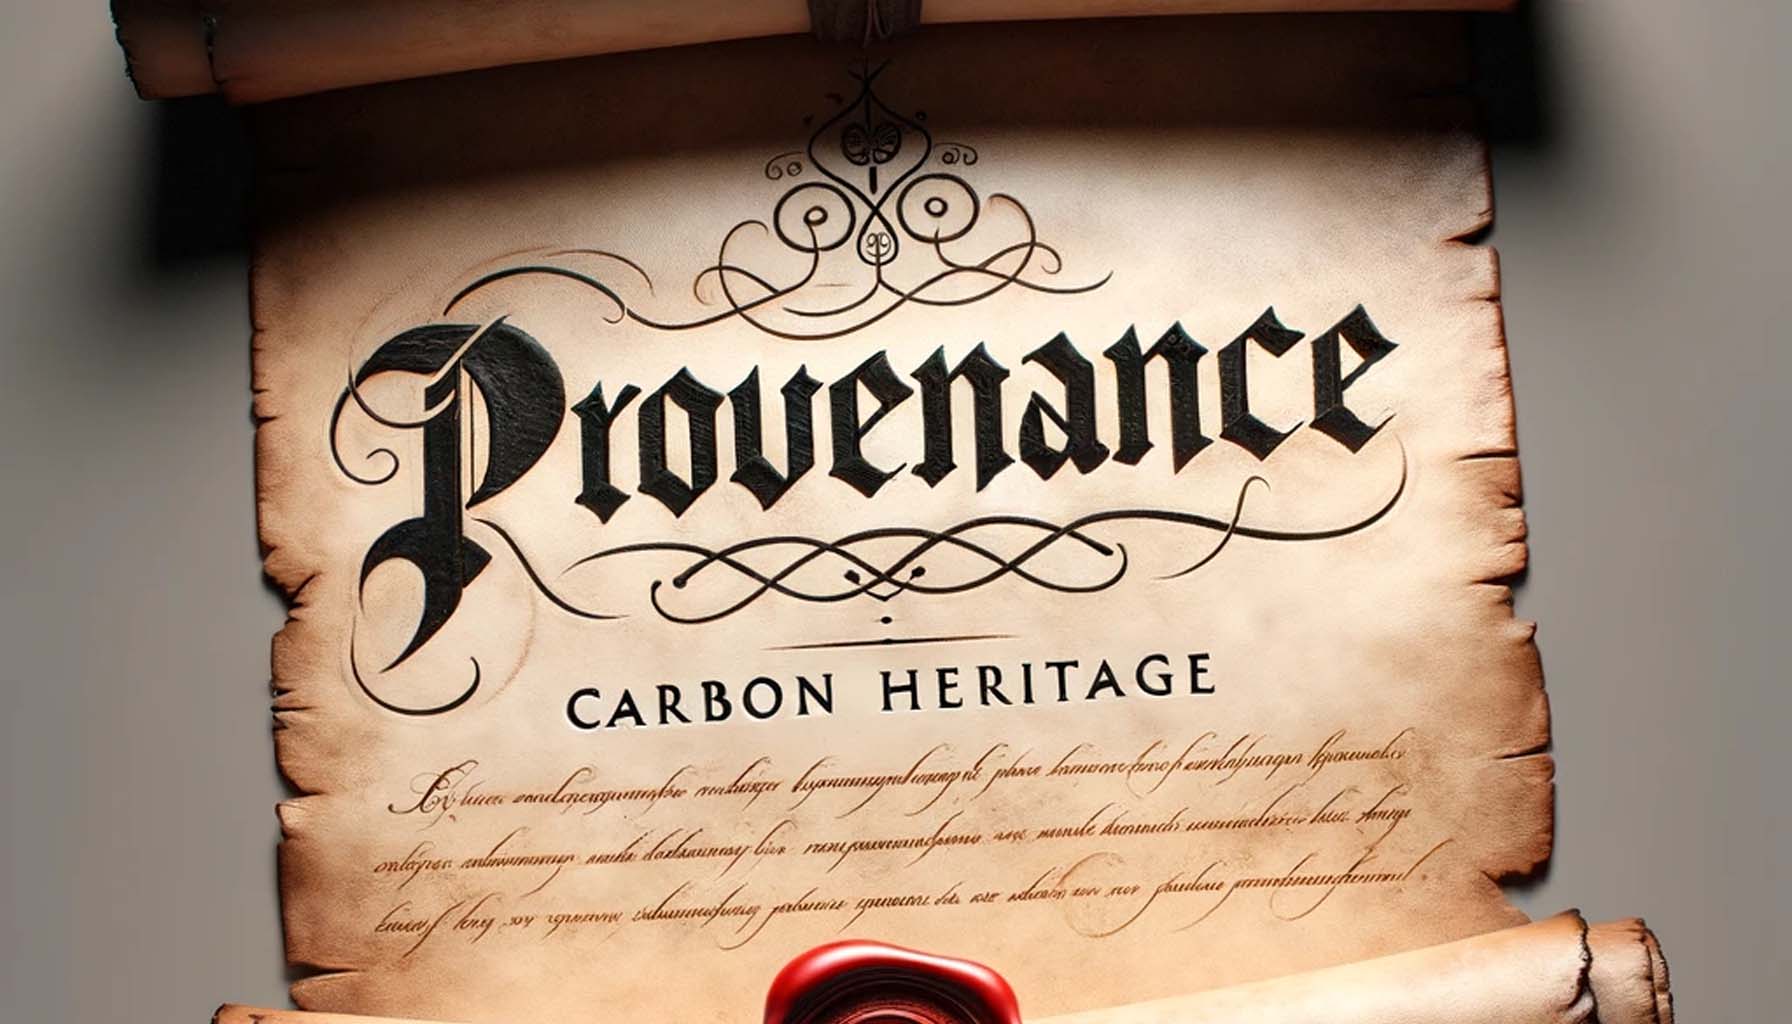 Your provenance pack from Carbon Heritage places you at the pinnacle of property custodianship.